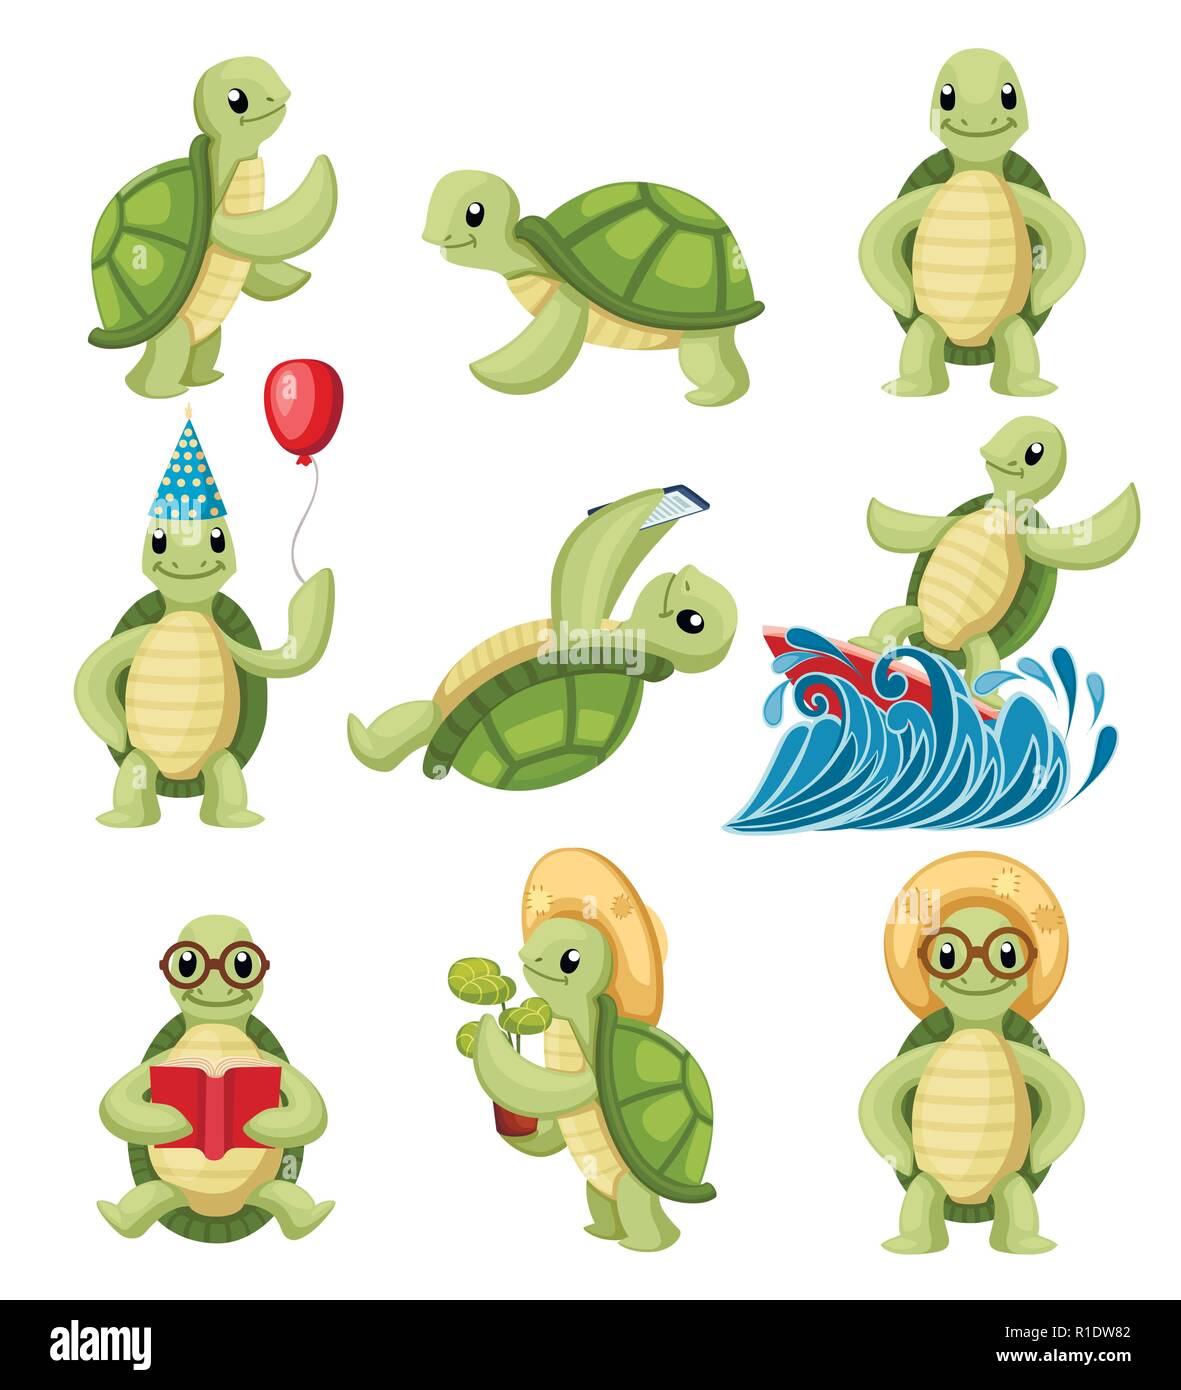 Collection of turtles cartoons characters. Little turtles do different things. Flat vector illustration isolated on white background. Stock Vector